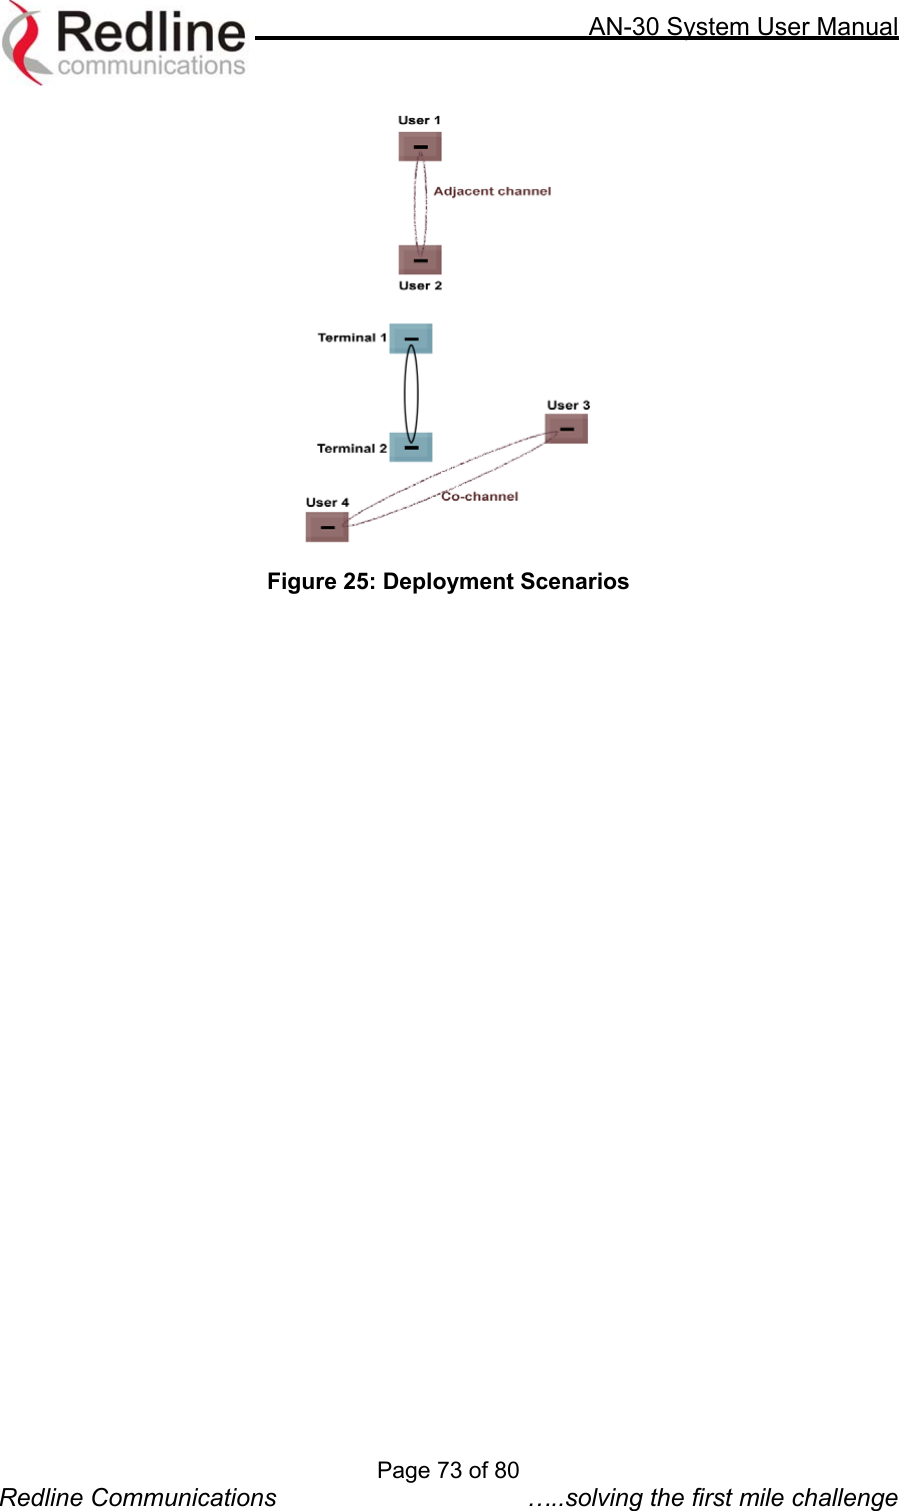     AN-30 System User Manual   Figure 25: Deployment Scenarios Page 73 of 80 Redline Communications  …..solving the first mile challenge 